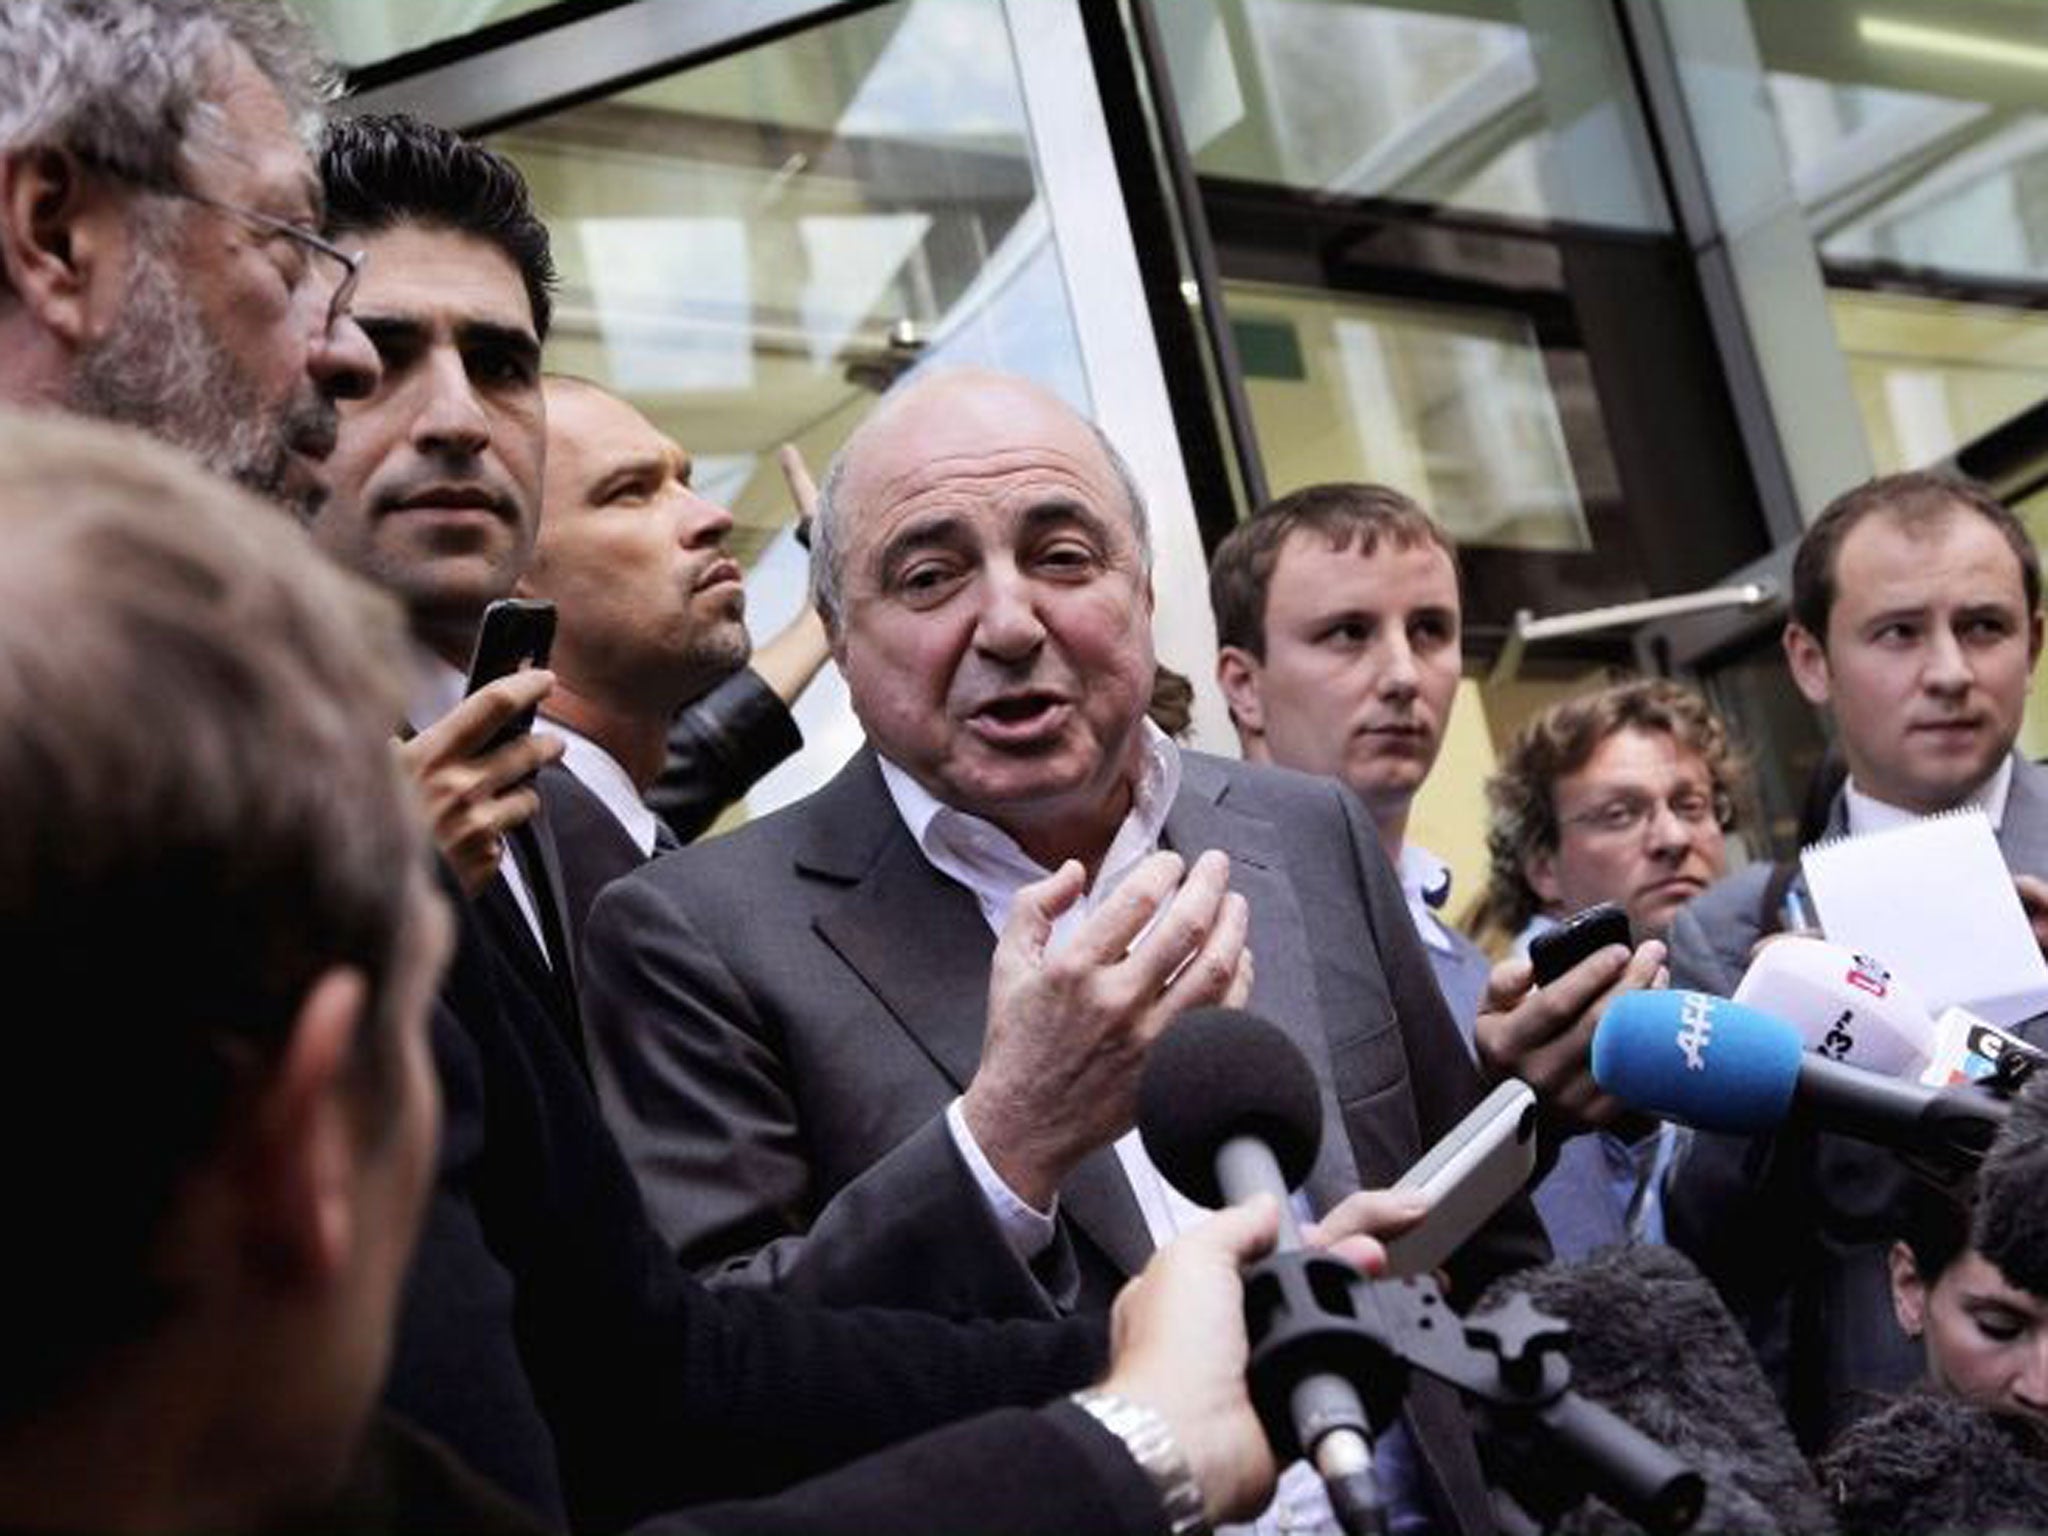 Biggest loser: the story of Boris Berezovsky's squandered billions is worthy of opera